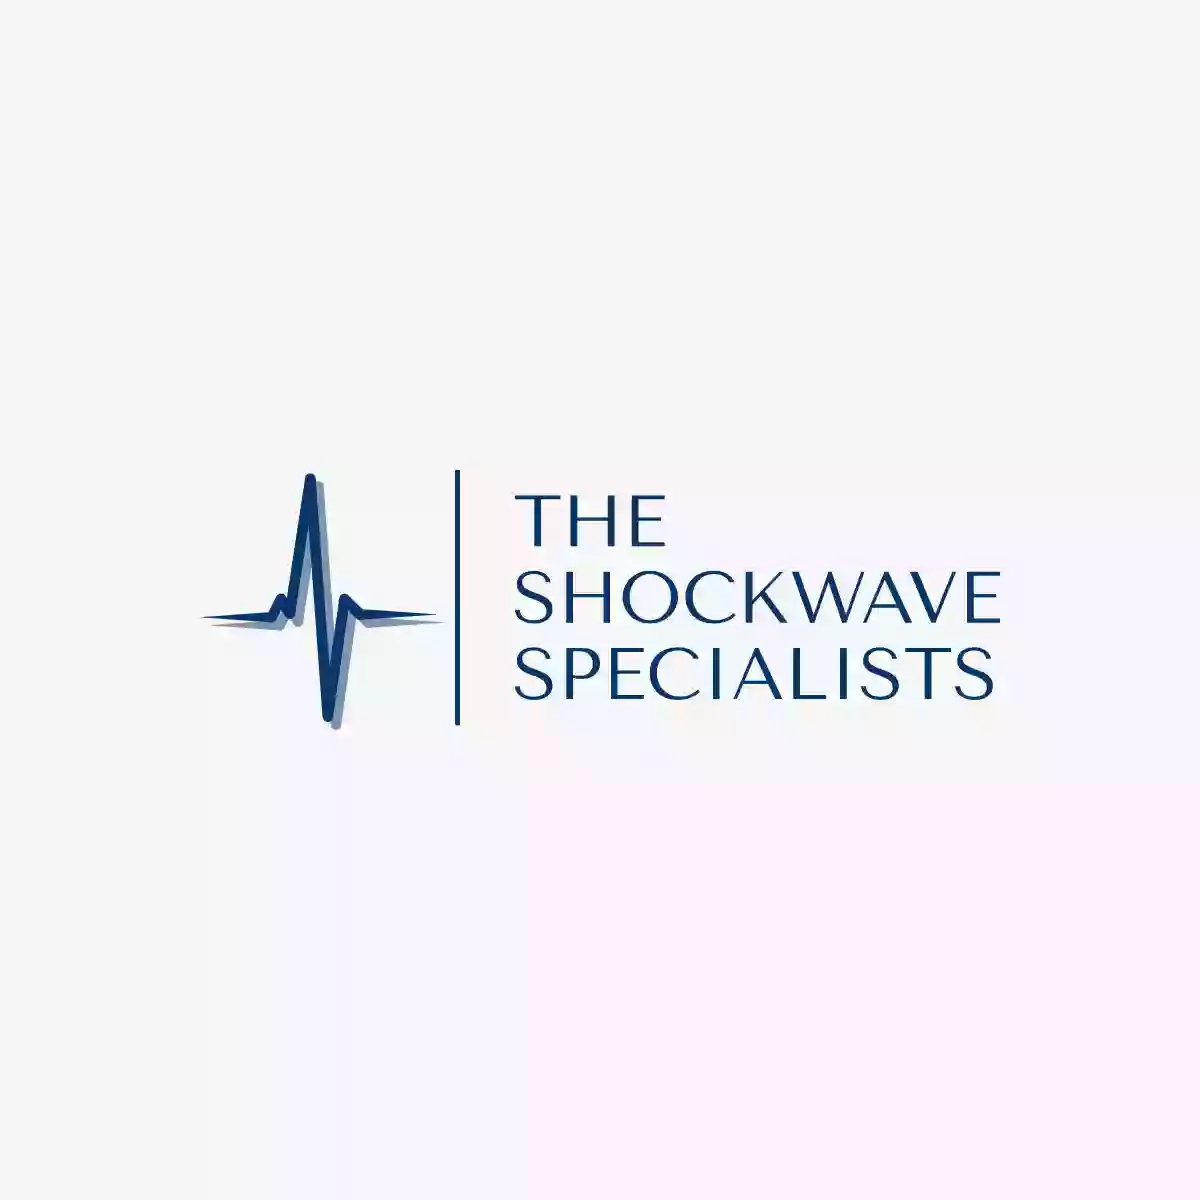 The Shockwave Specialists